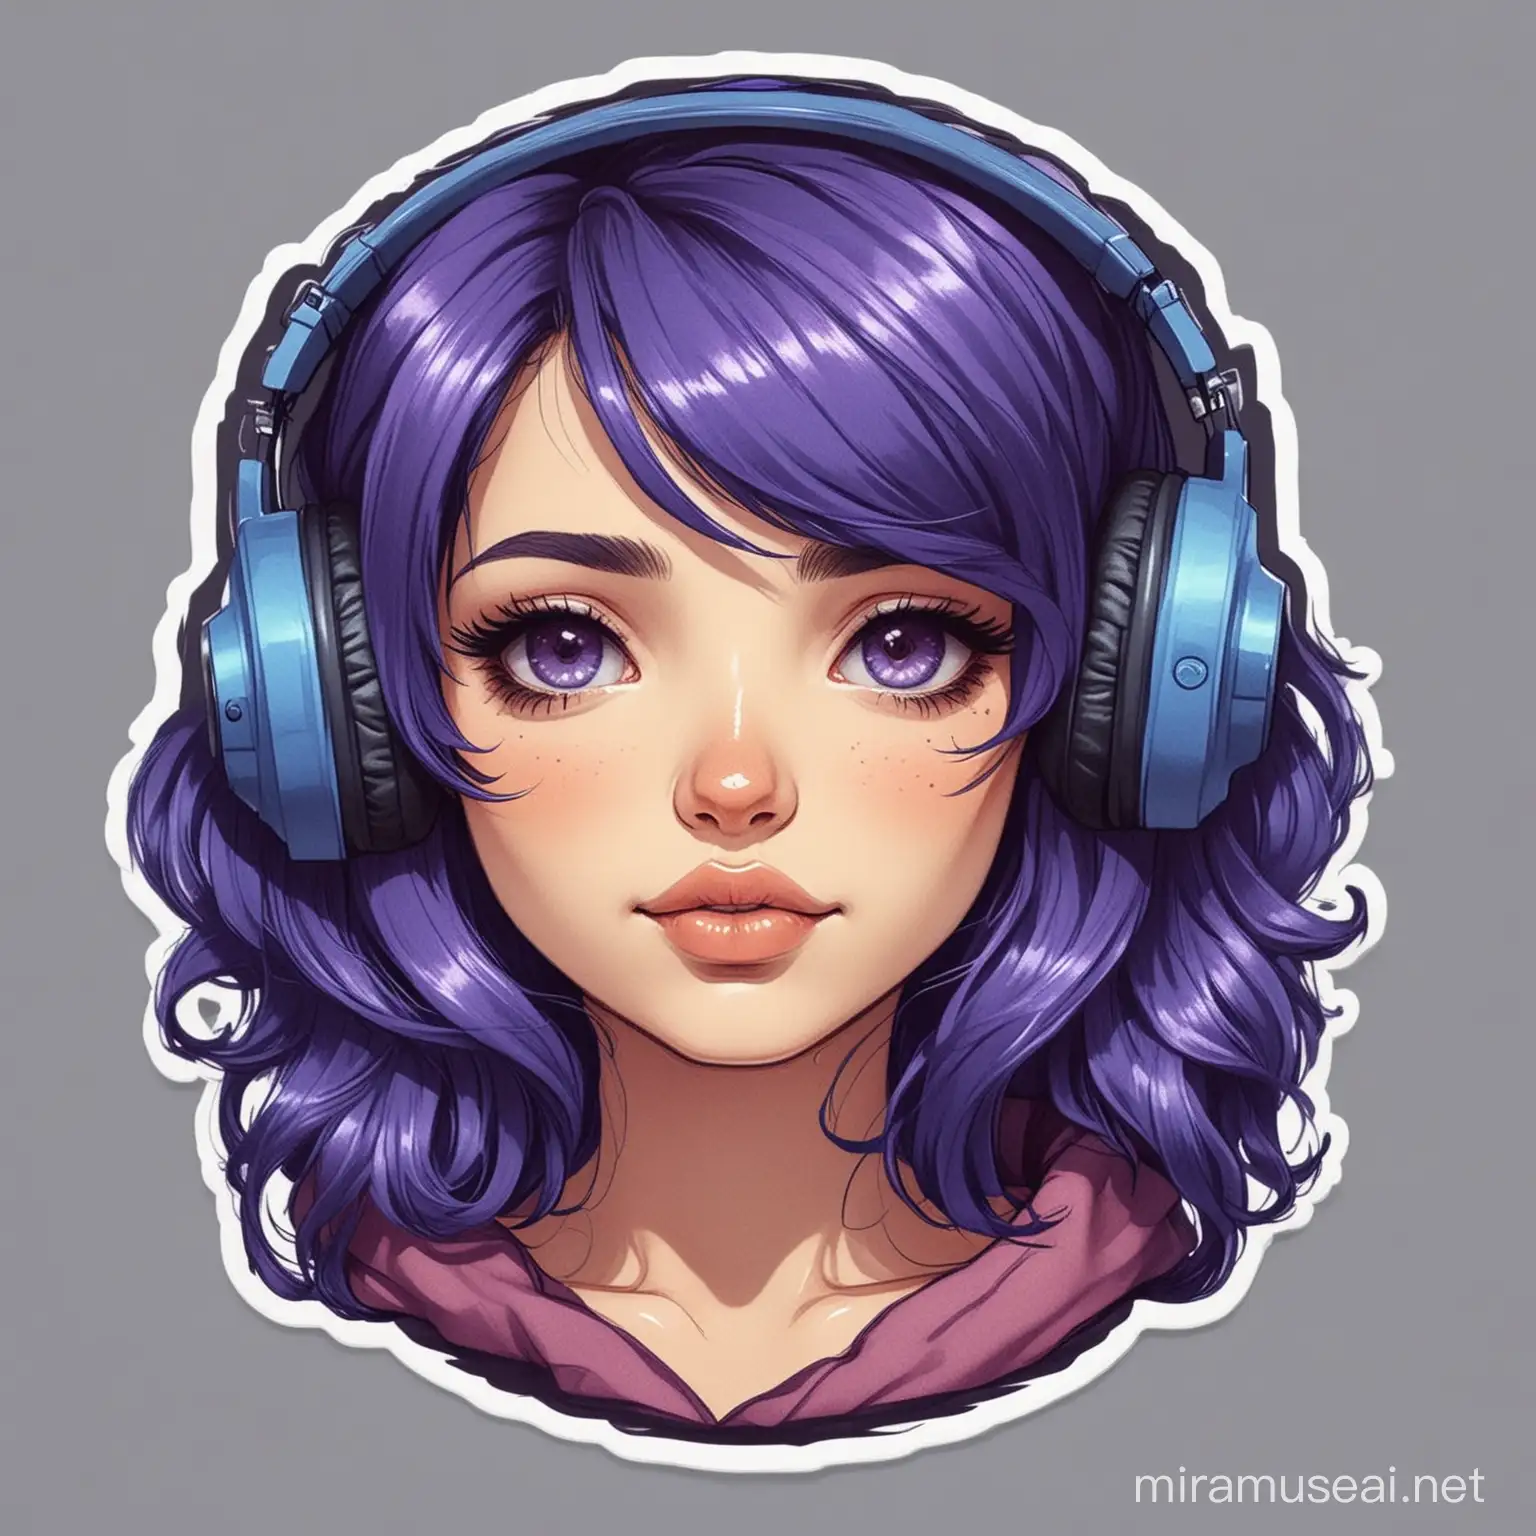 Cozy Woman with Detailed Cartoon Sticker Style Vibrant BlueViolet Hair and Stylish Headphones